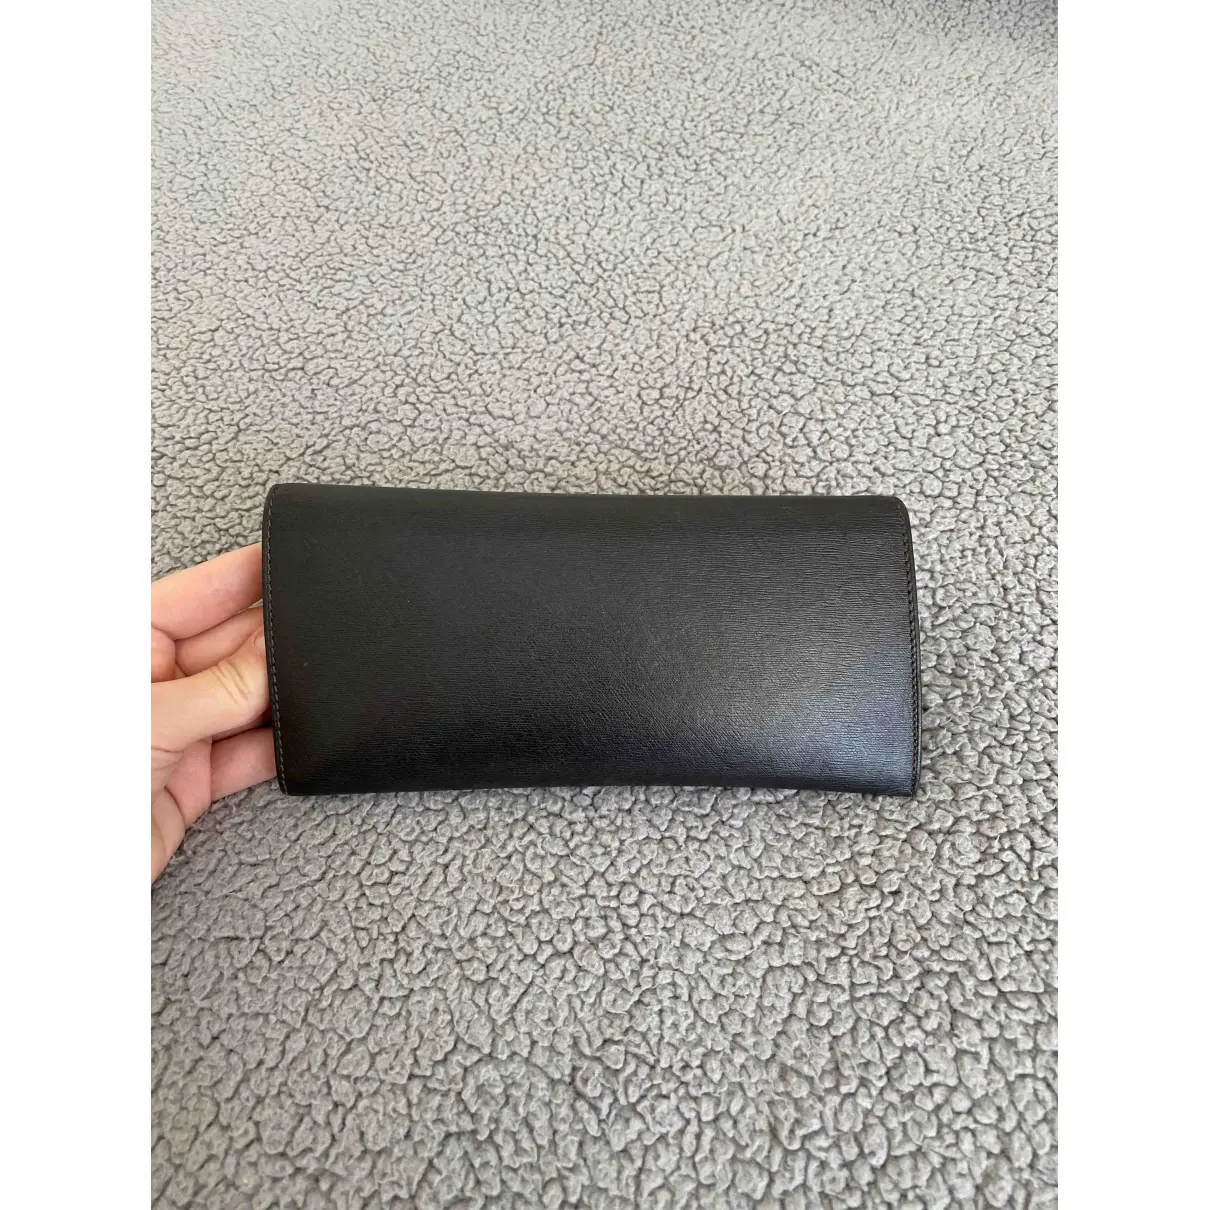 Buy Alfred Dunhill Leather wallet online